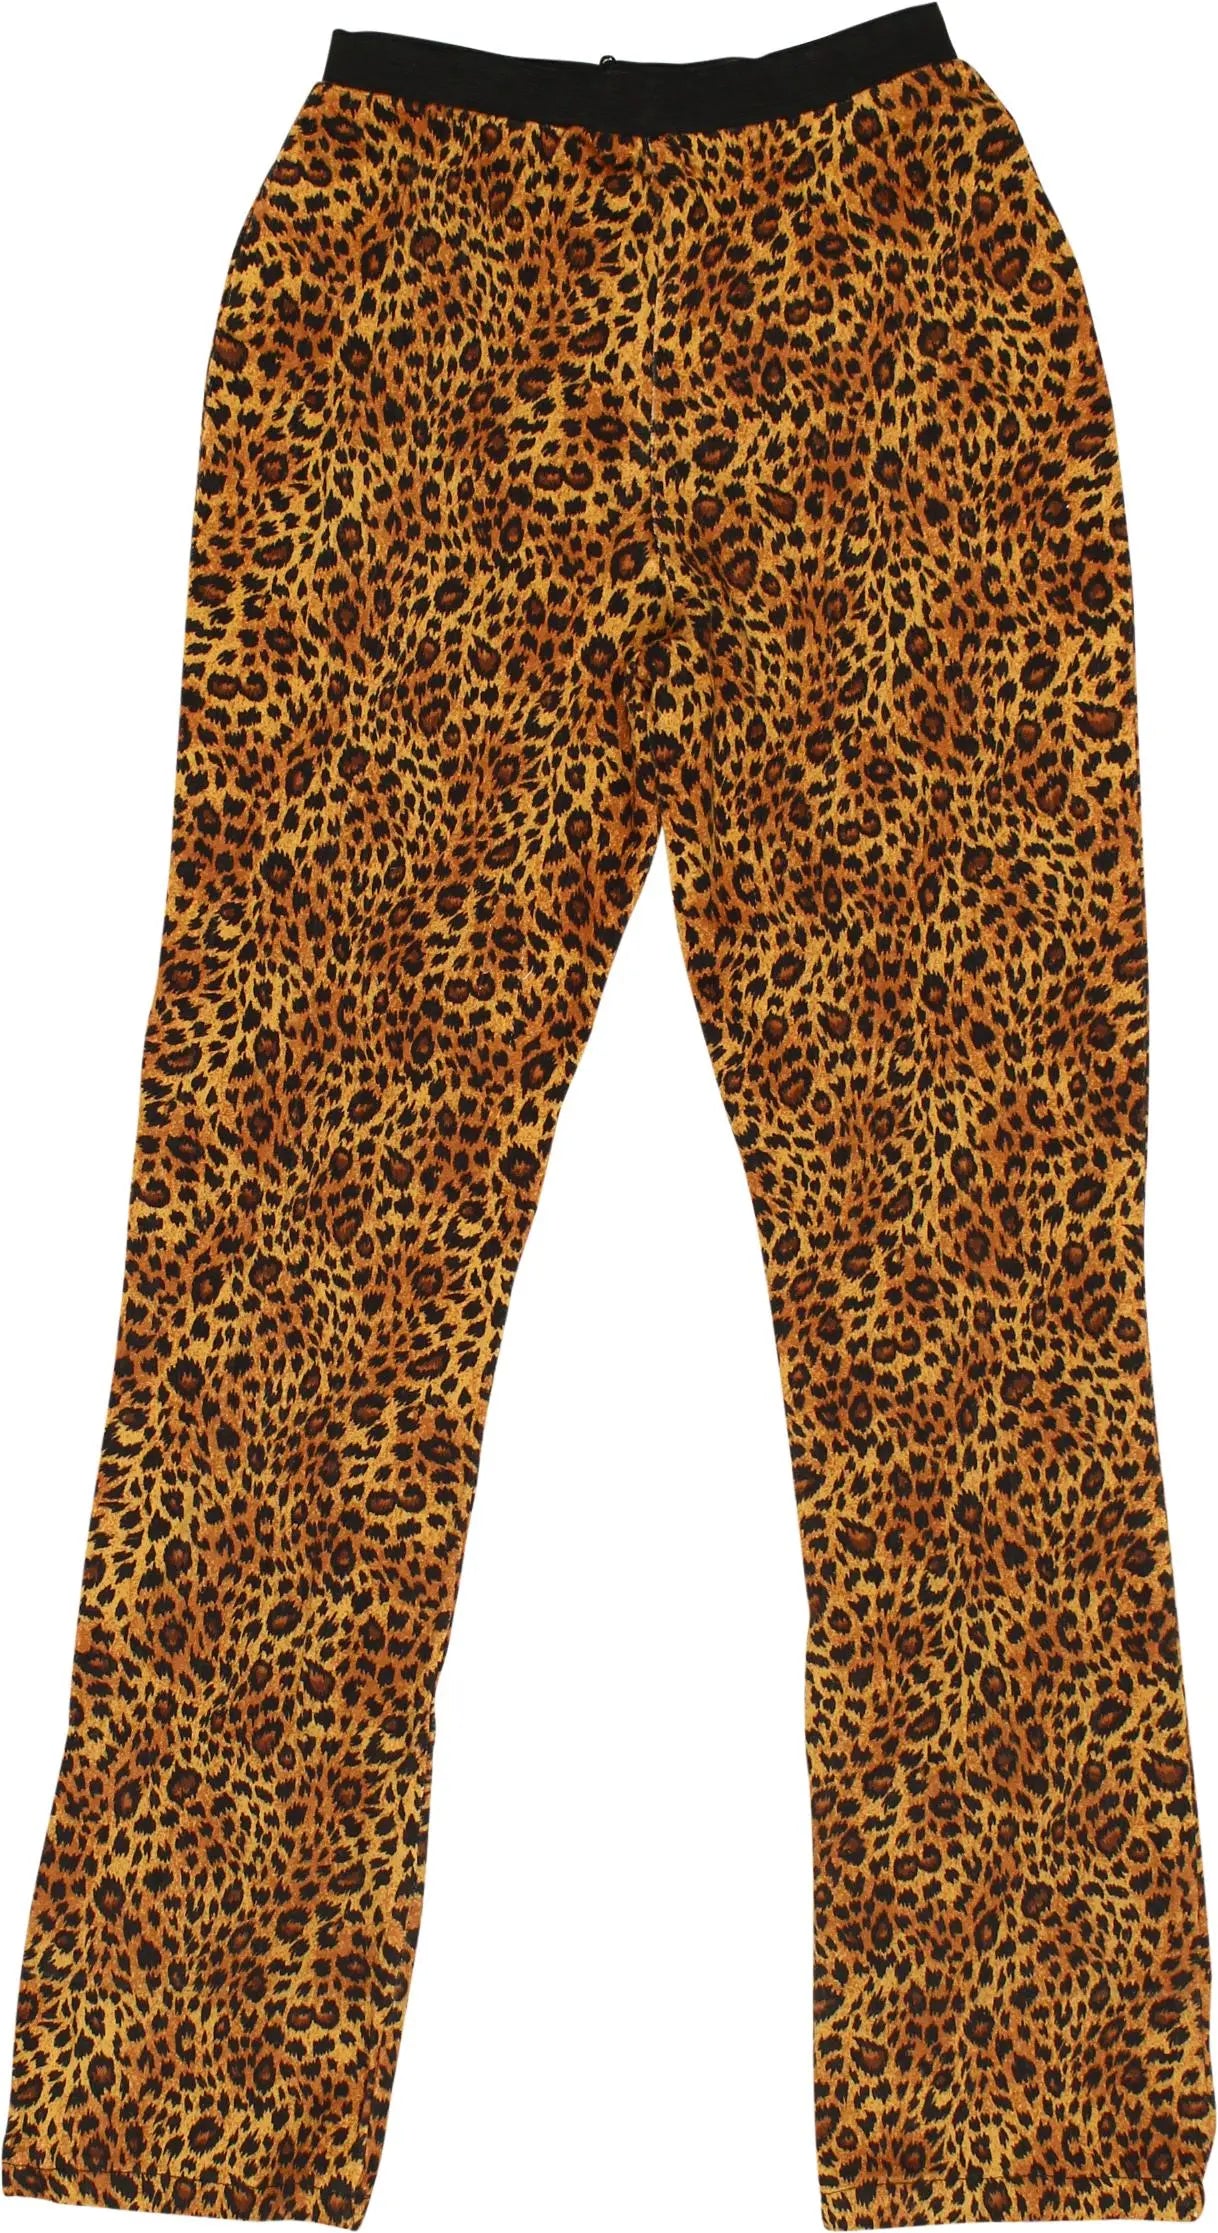 Unknown - Animal Printed Legging- ThriftTale.com - Vintage and second handclothing